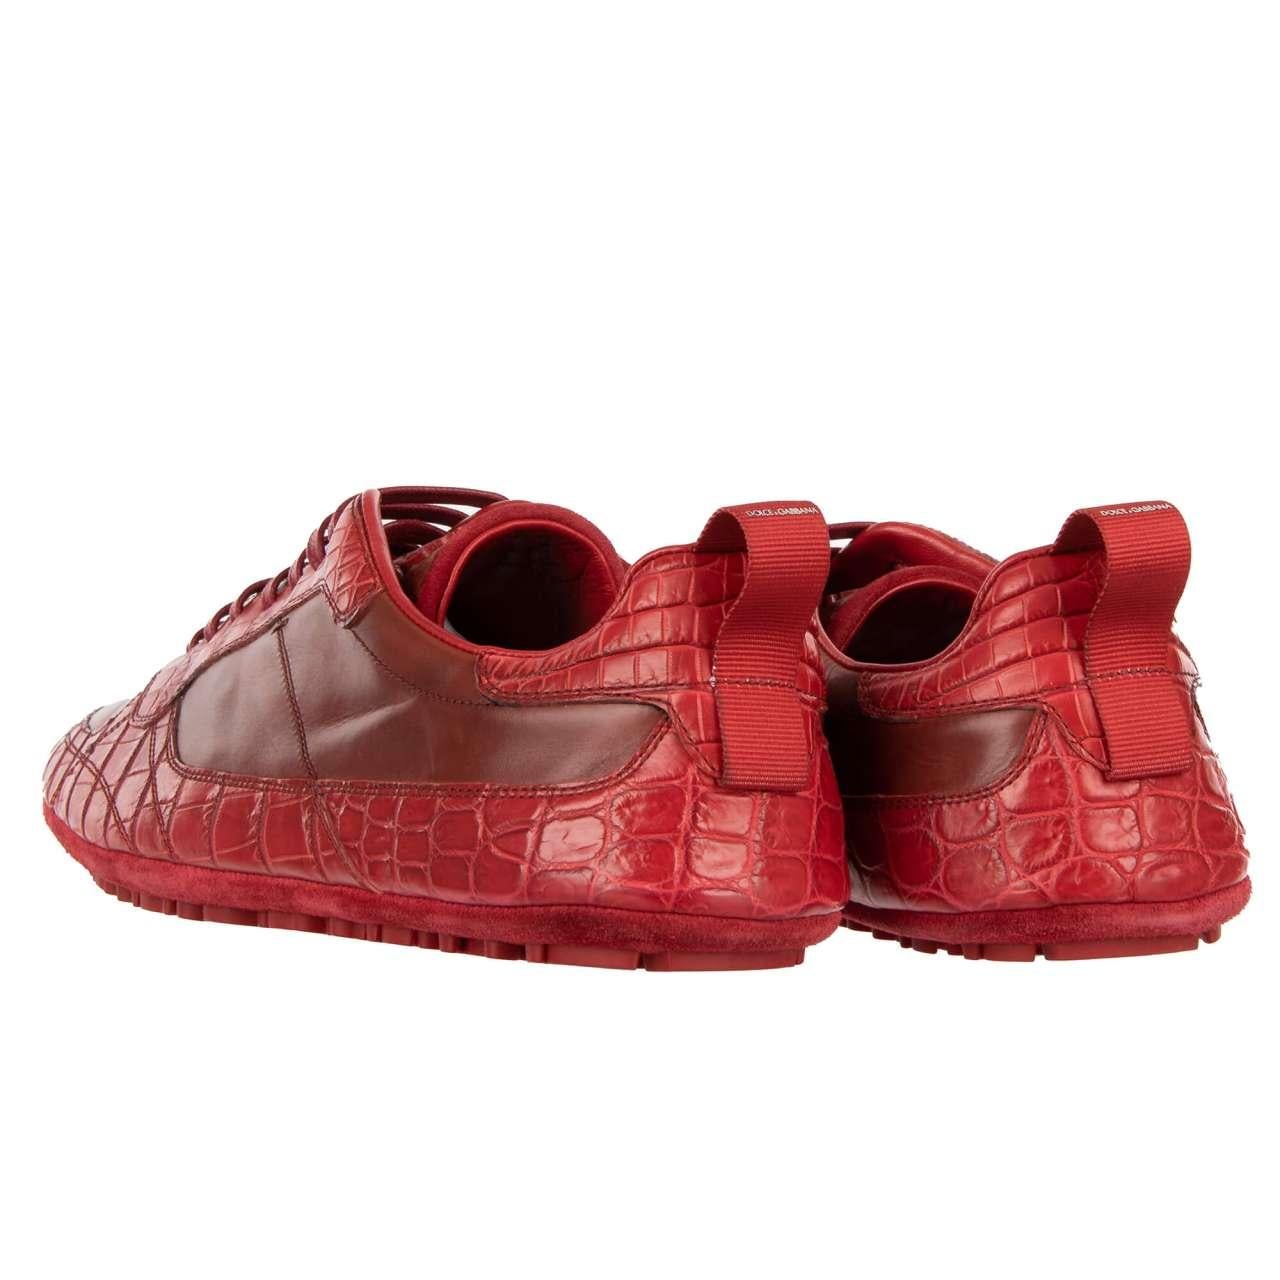 Dolce & Gabbana Low-Top Croco Sneaker KING DRIVER with Crown Red 44 UK 10 In Excellent Condition For Sale In Erkrath, DE